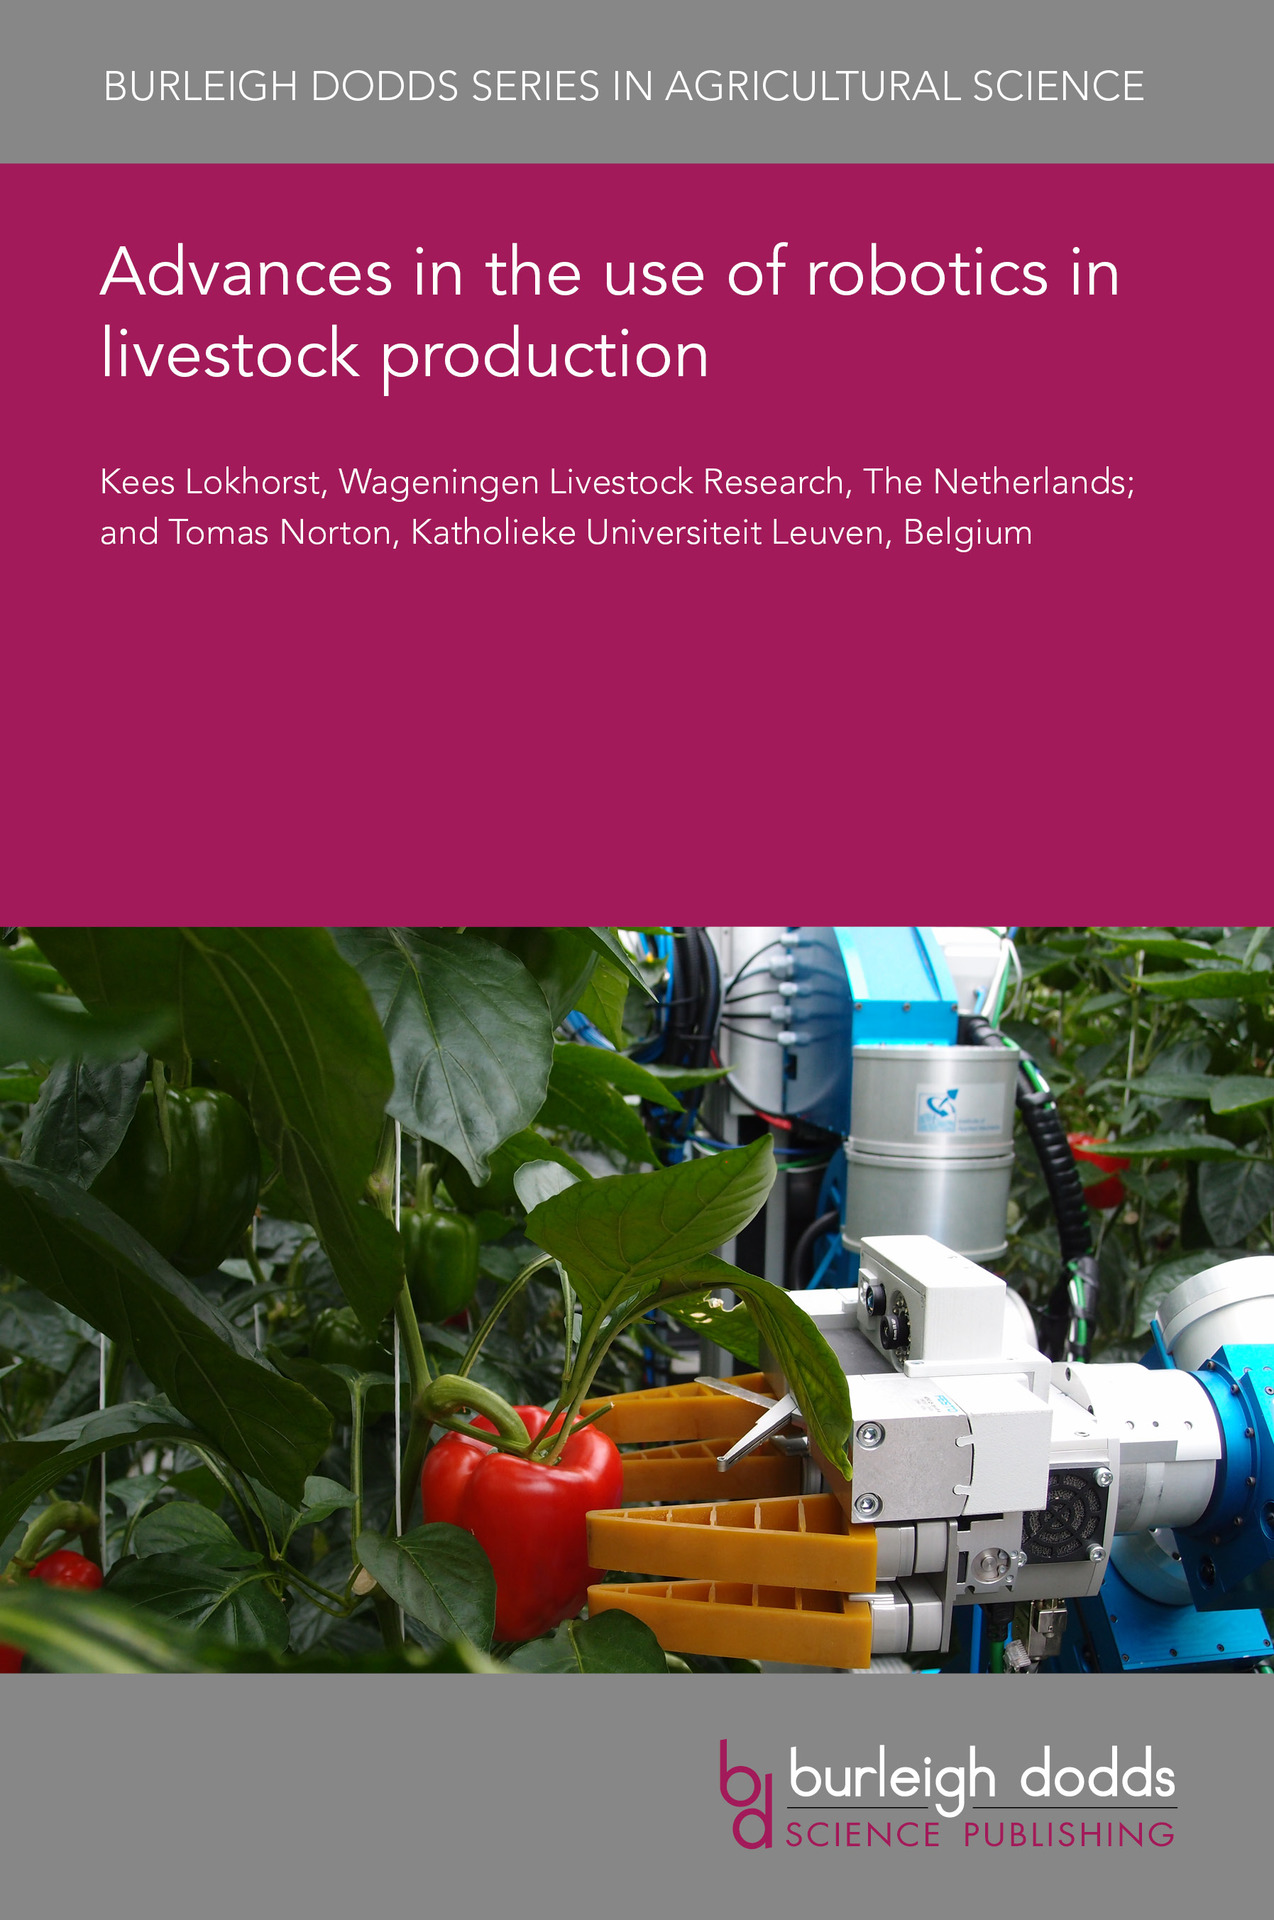 Advances in the use of robotics in livestock production